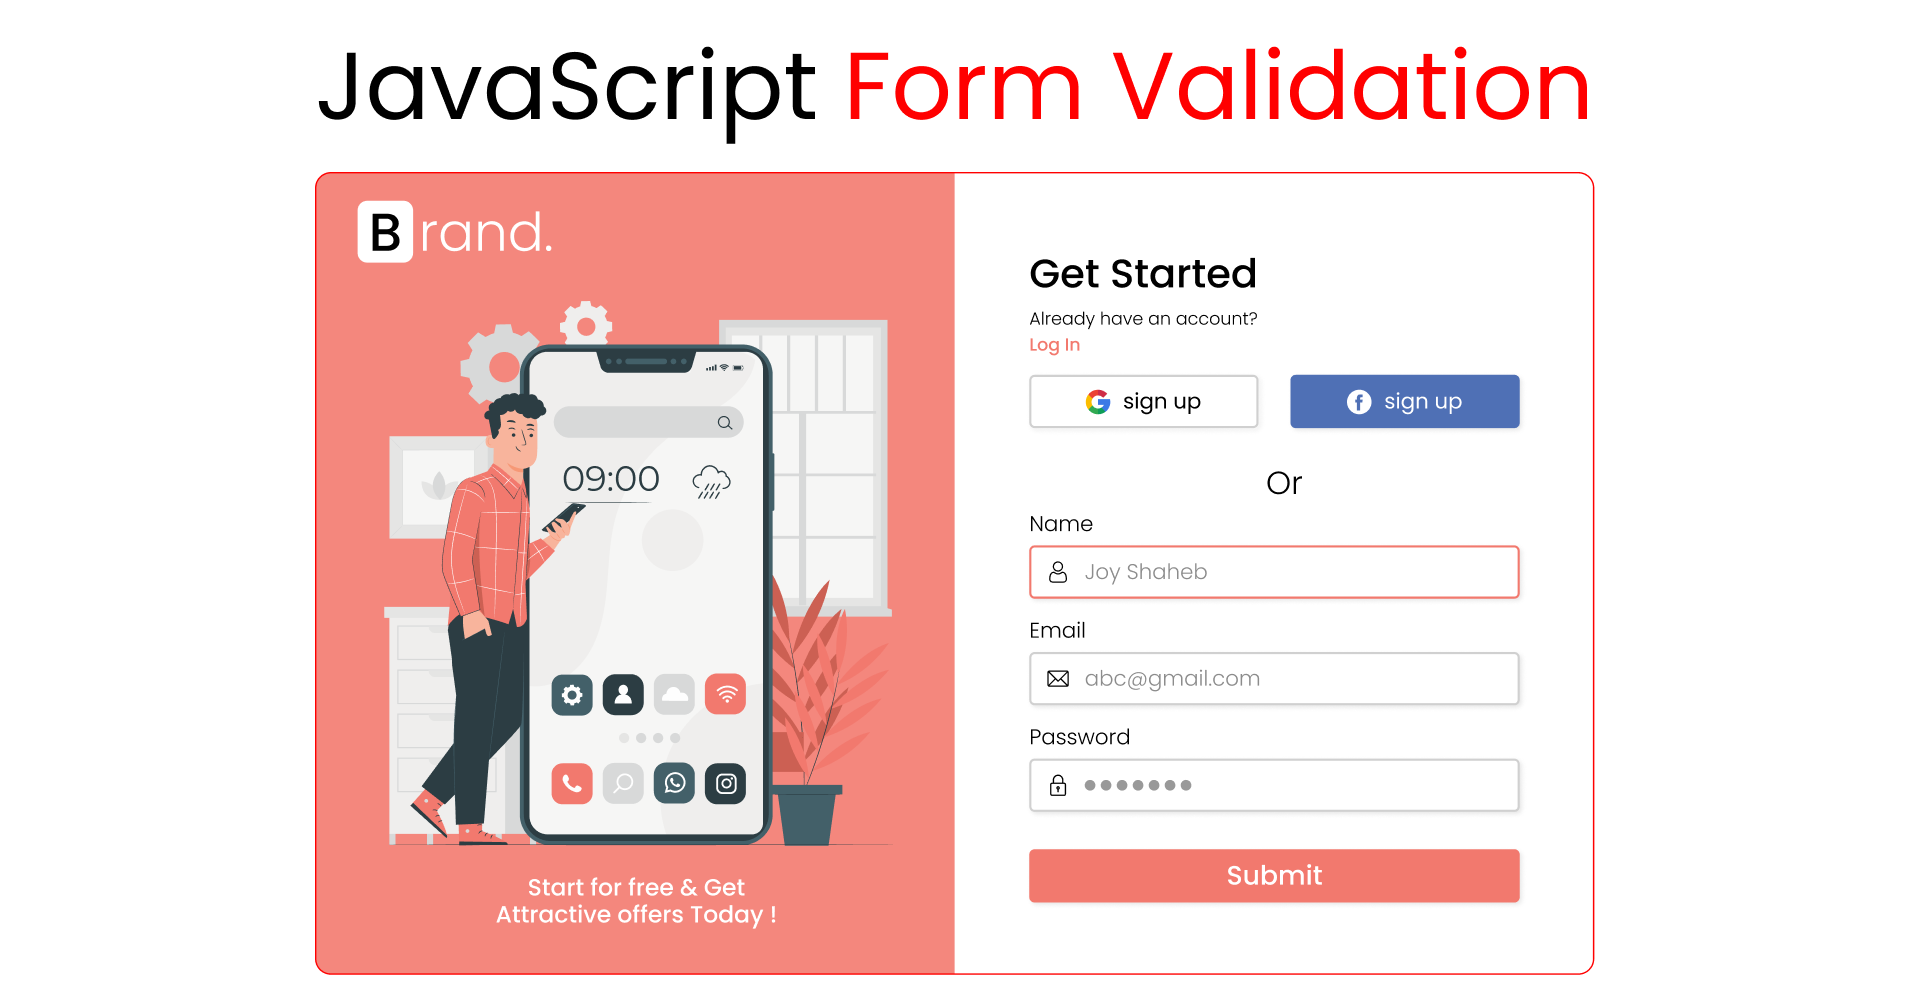 Learn JavaScript Form Validation – Build a JS Project for Beginners ✨